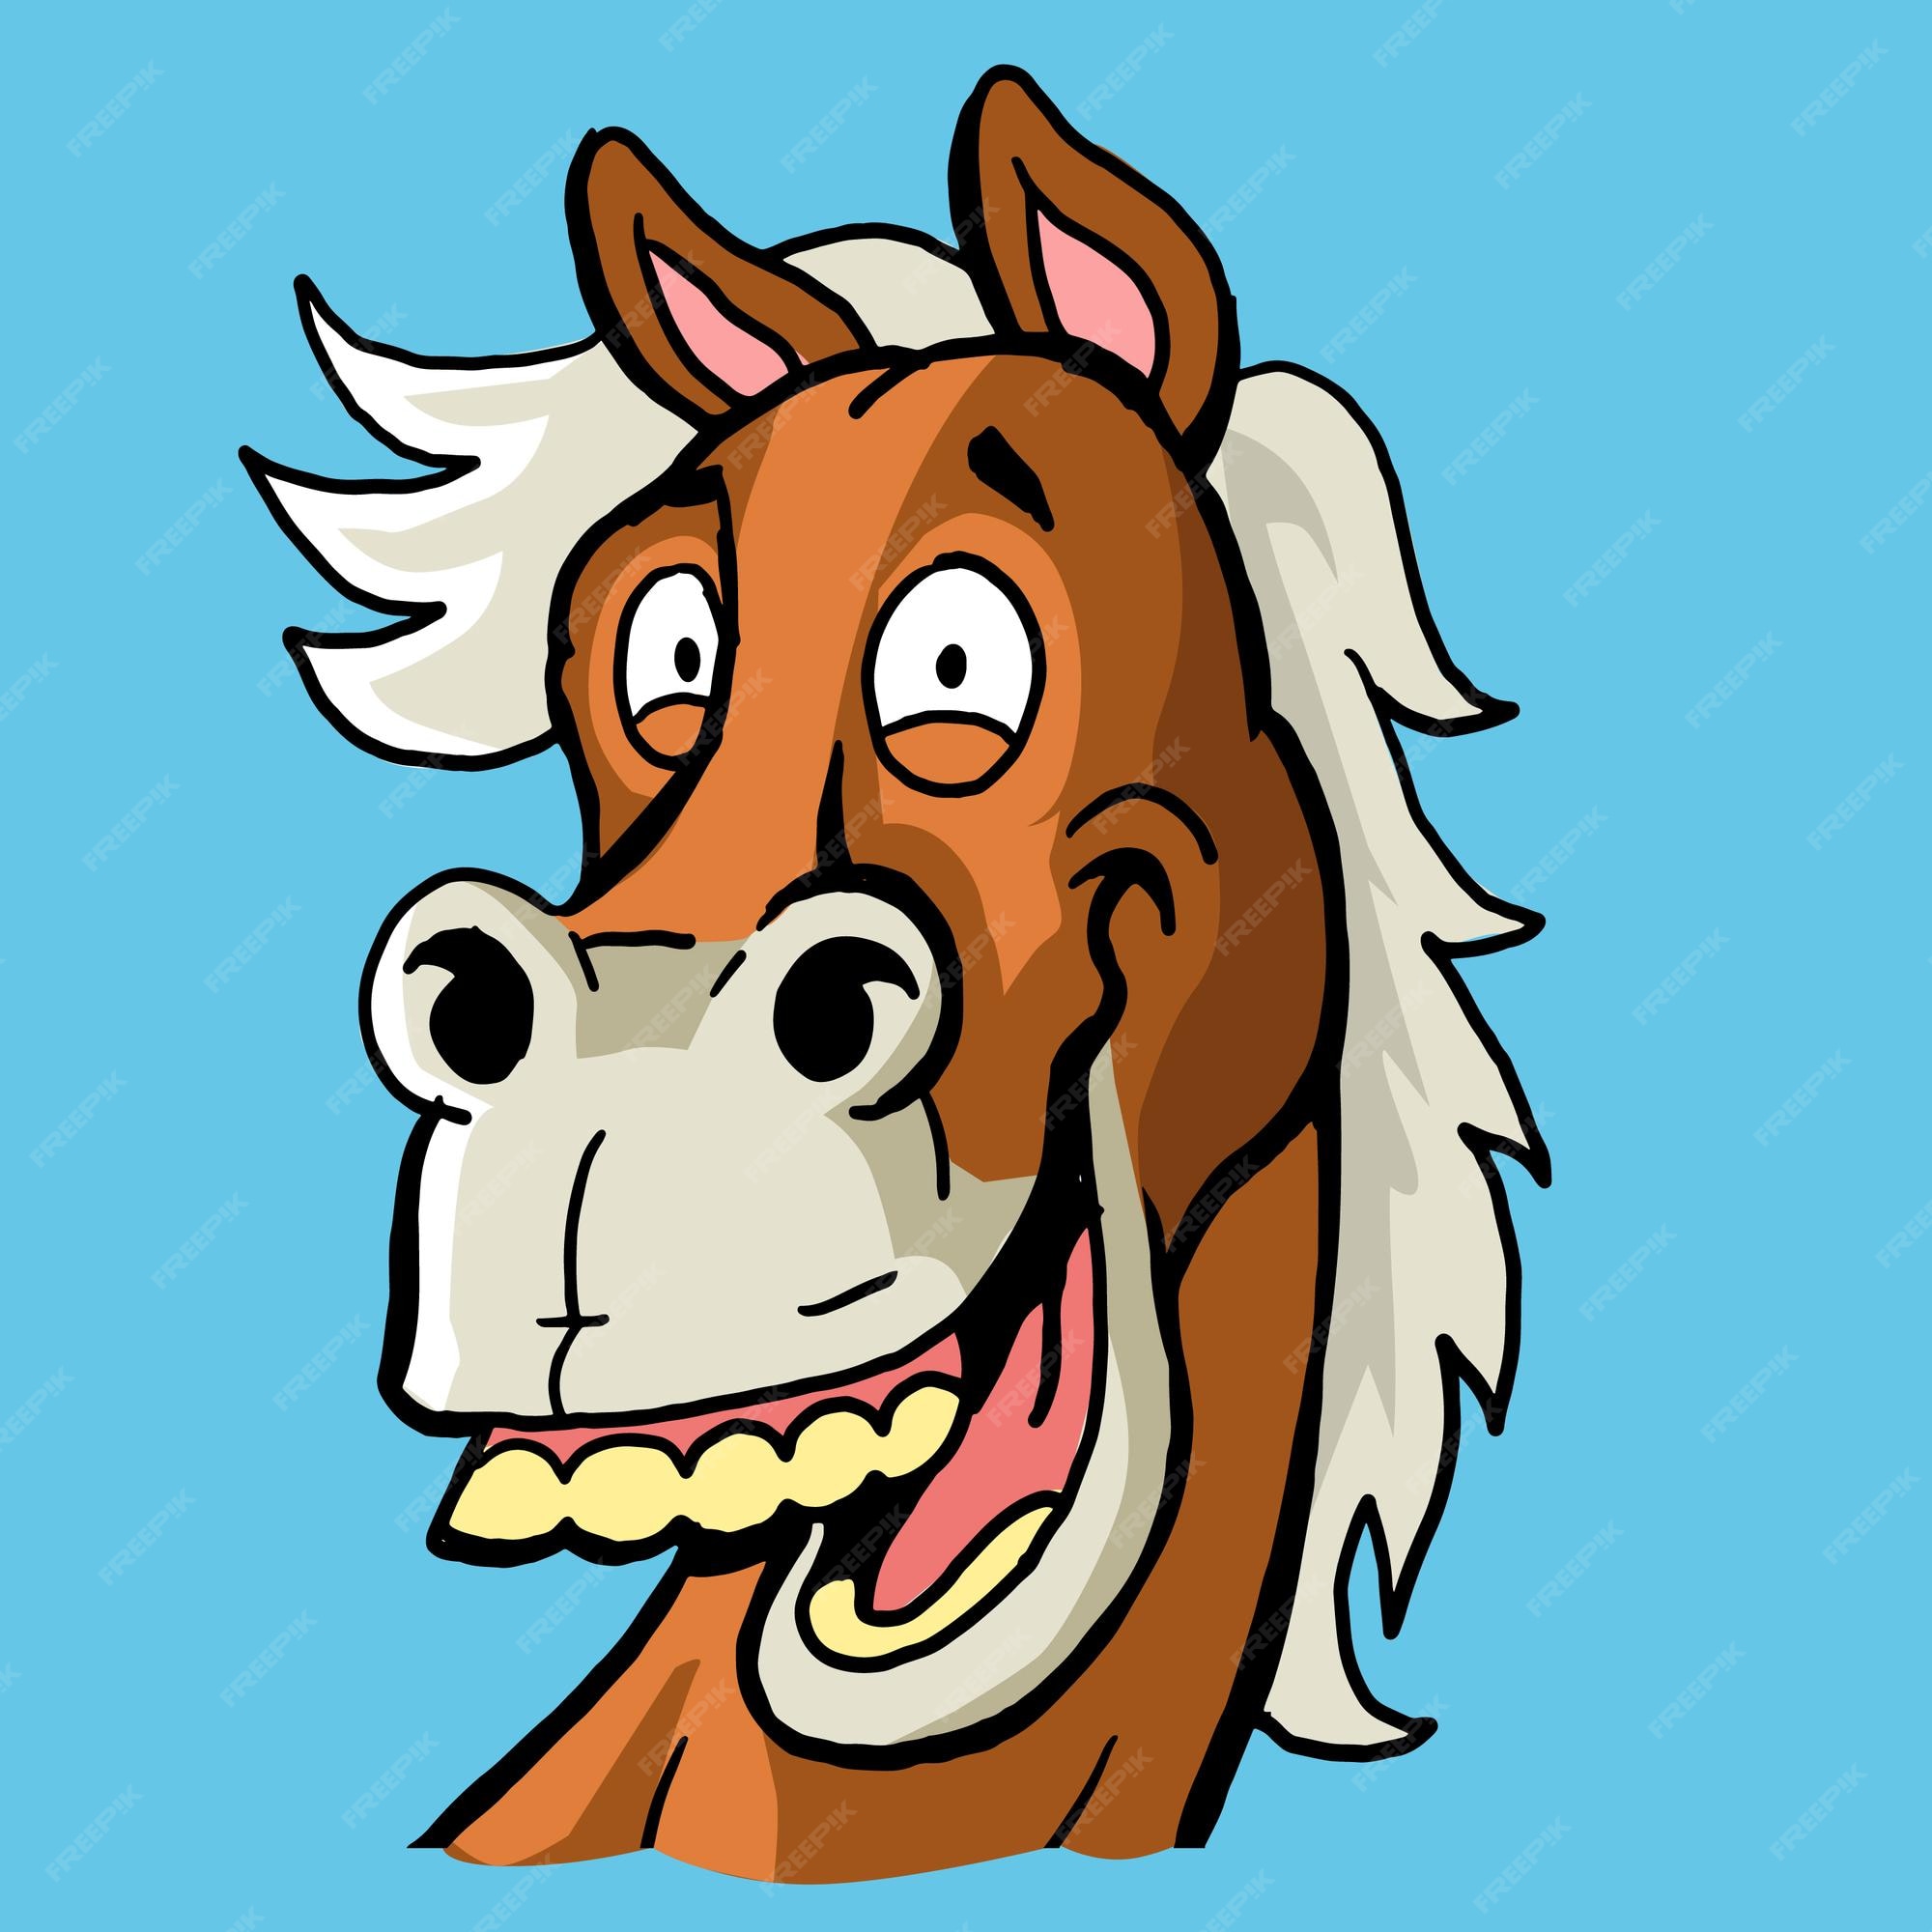 ugly-horse-smile-shows-her-teeth_98143-467.jpg